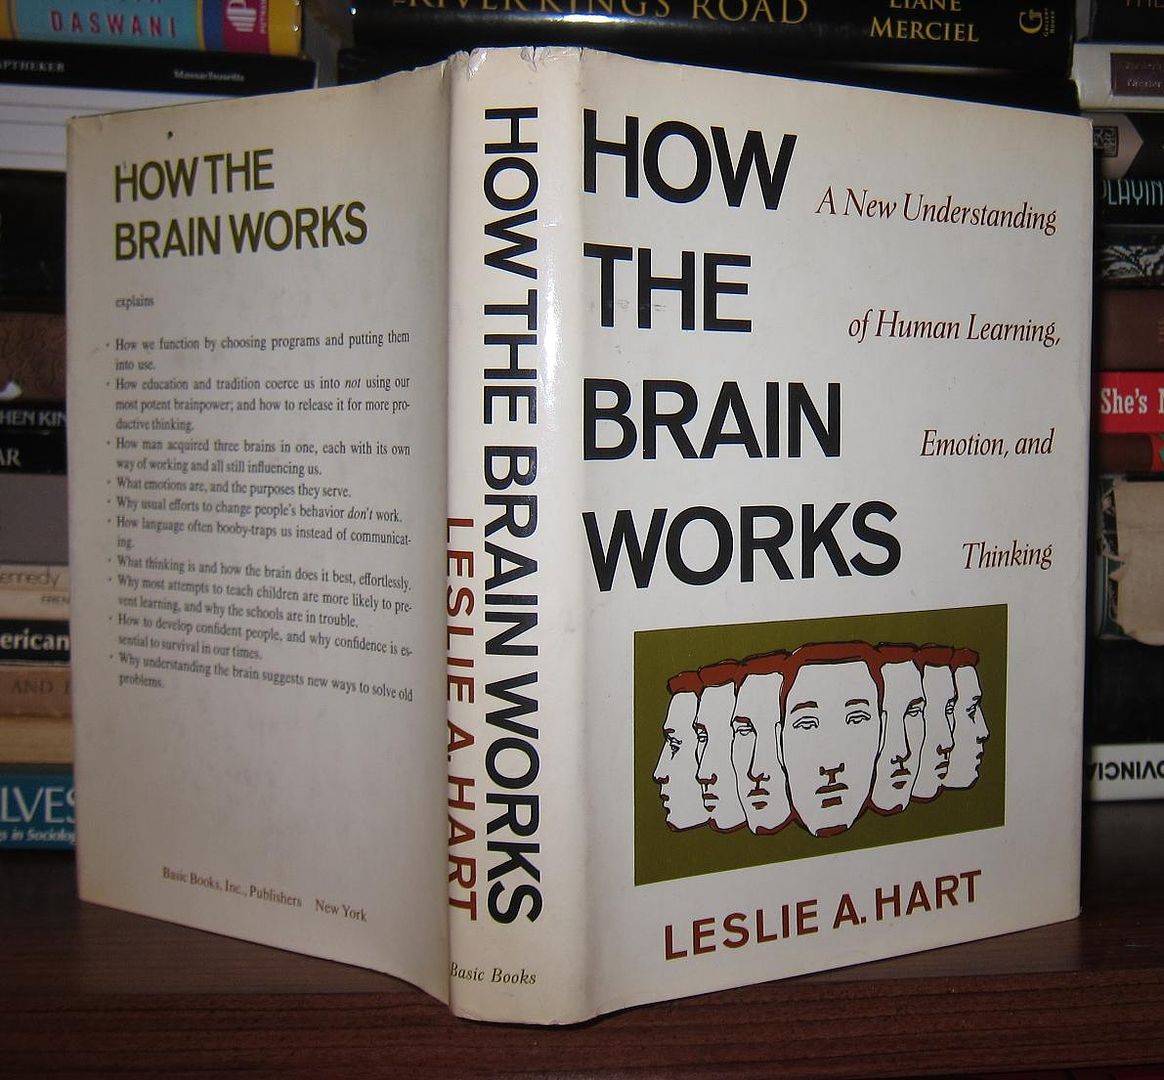 HART, LESLIE A. - How the Brain Works a New Understanding of Human Learning, Emotion, and Thinking